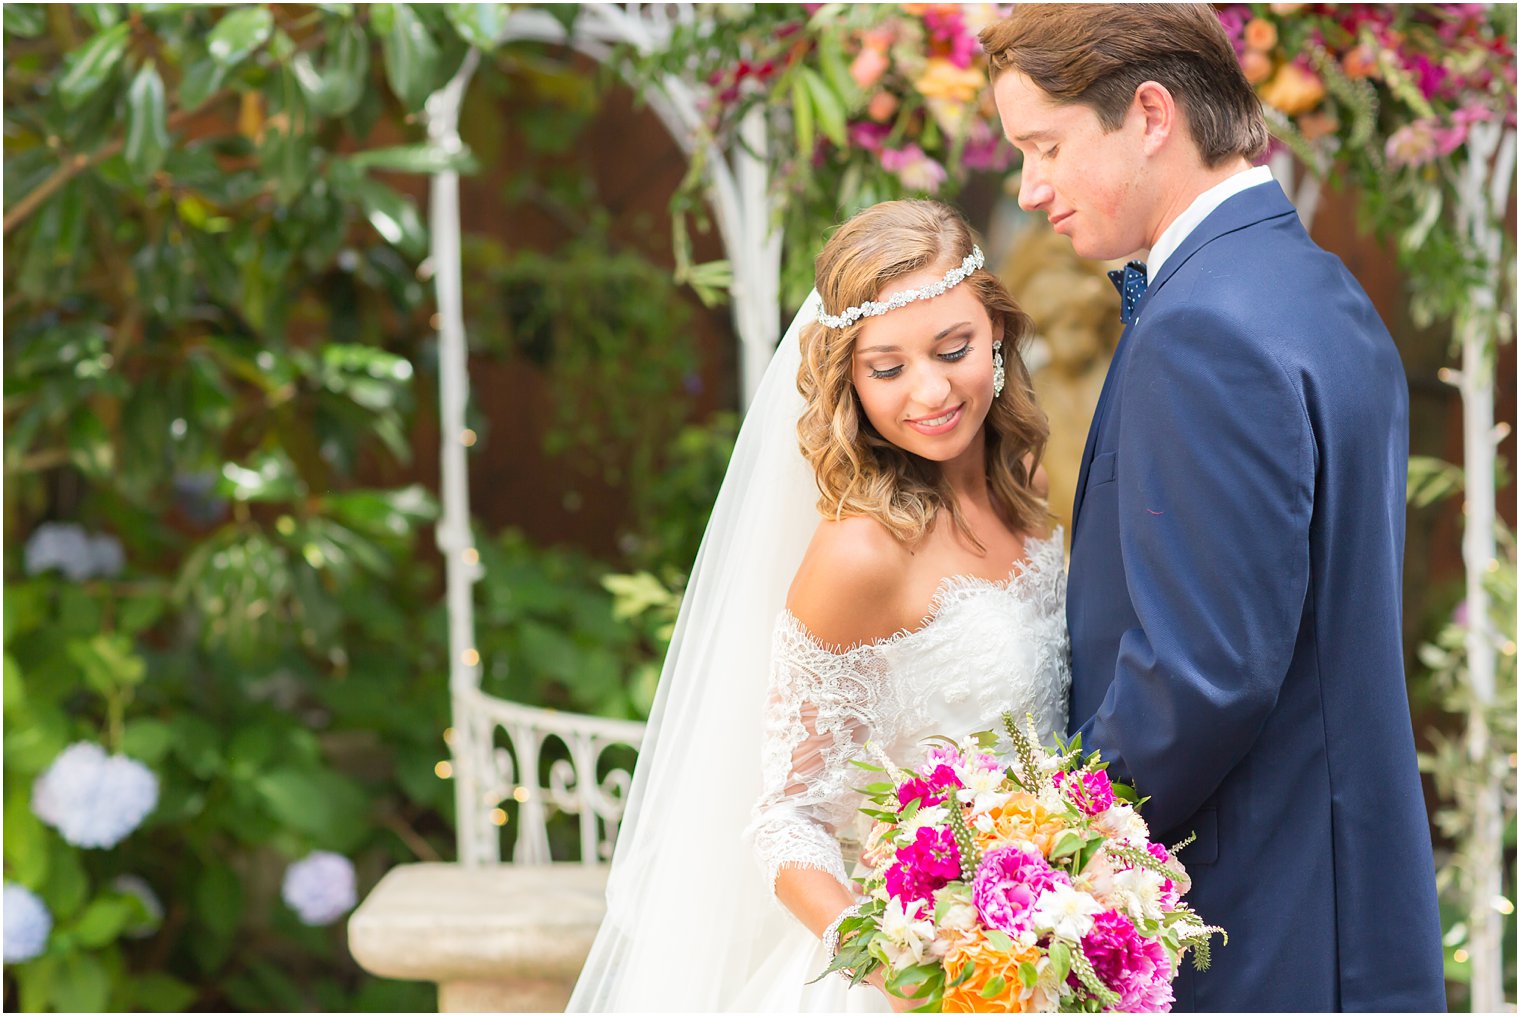 Hair and Makeup by Lavish Salon in LBI | The Gables Wedding